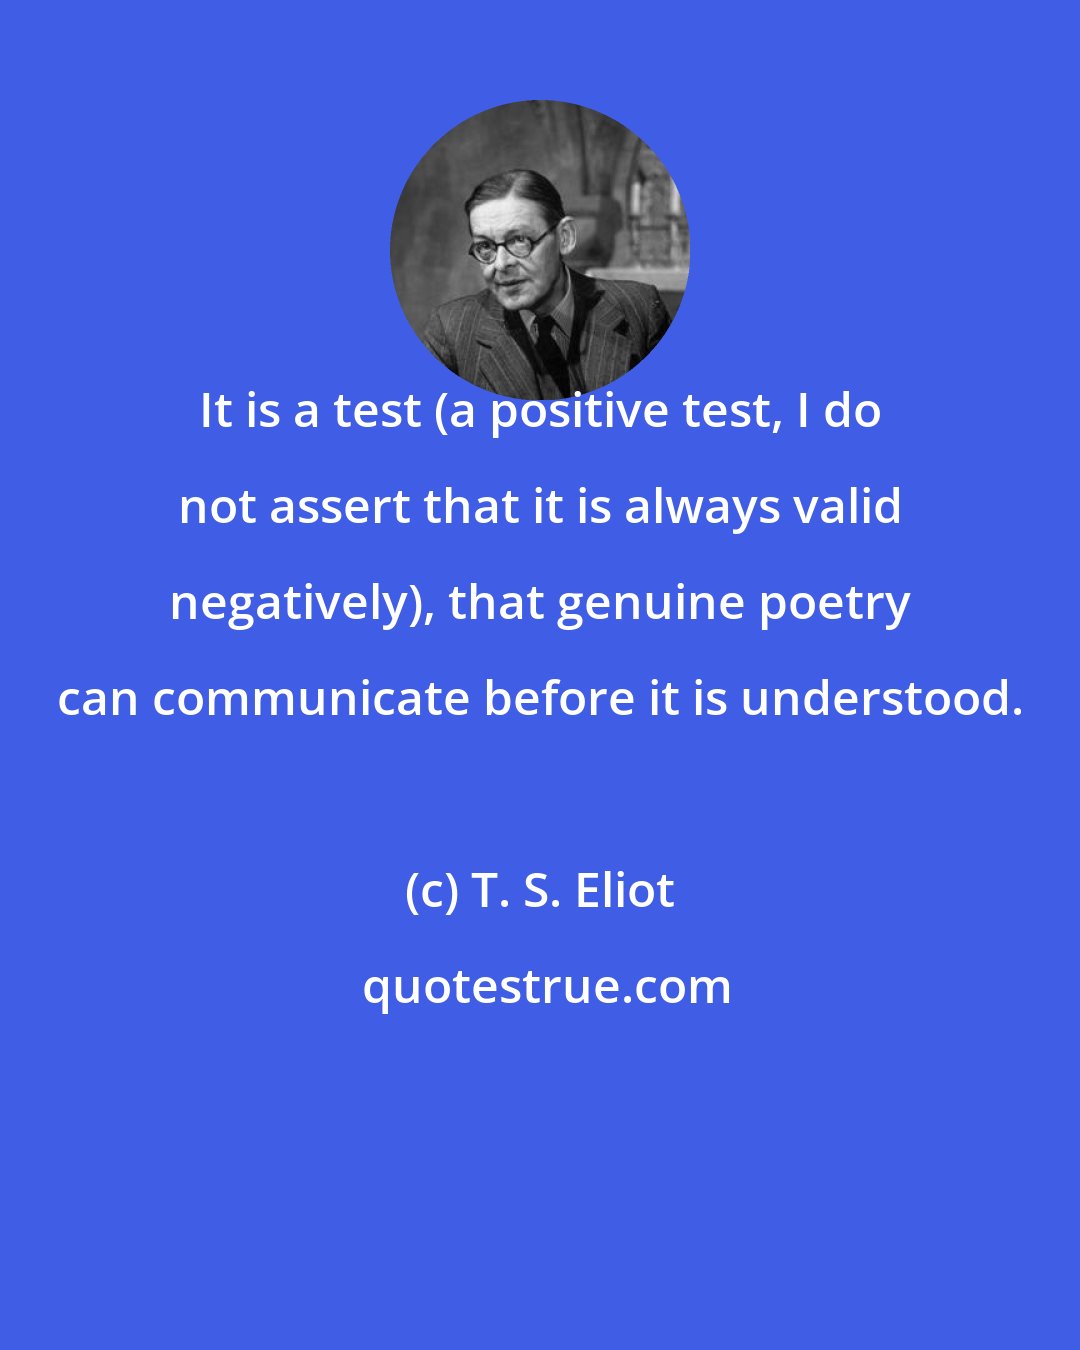 T. S. Eliot: It is a test (a positive test, I do not assert that it is always valid negatively), that genuine poetry can communicate before it is understood.